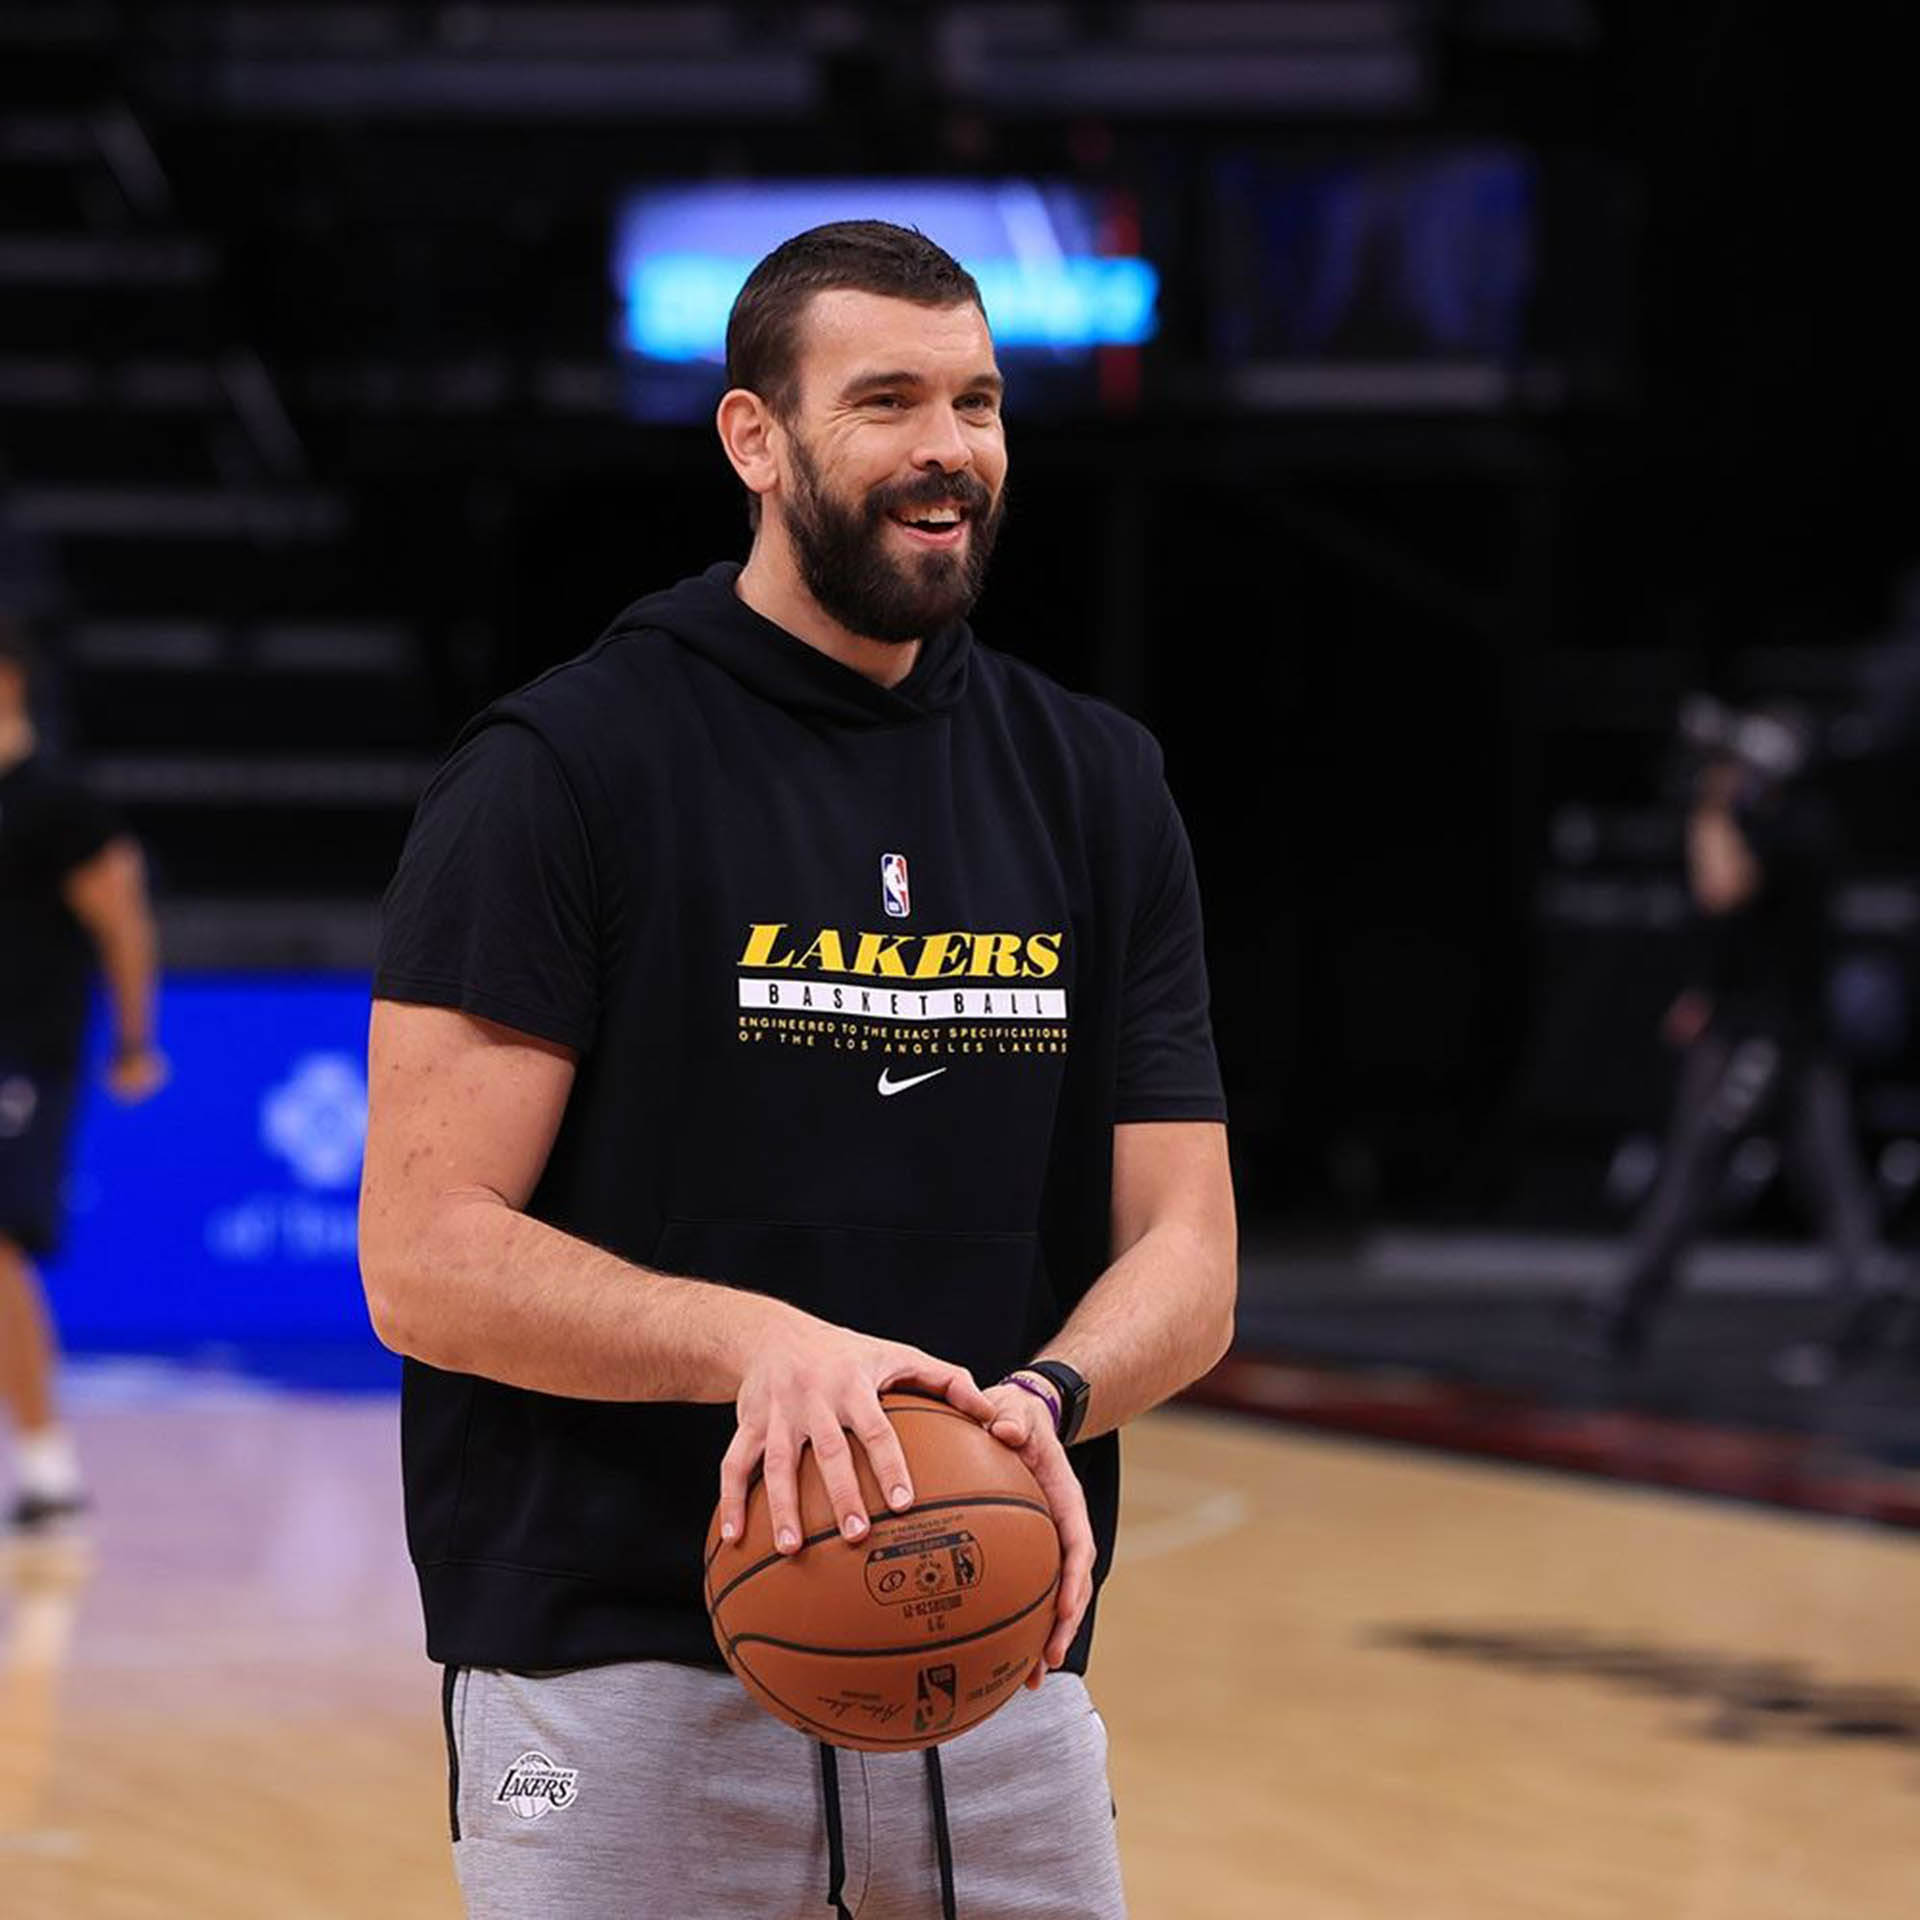 Lakers Center, Marc Gasol Seen Warming Up Before A Game. Background